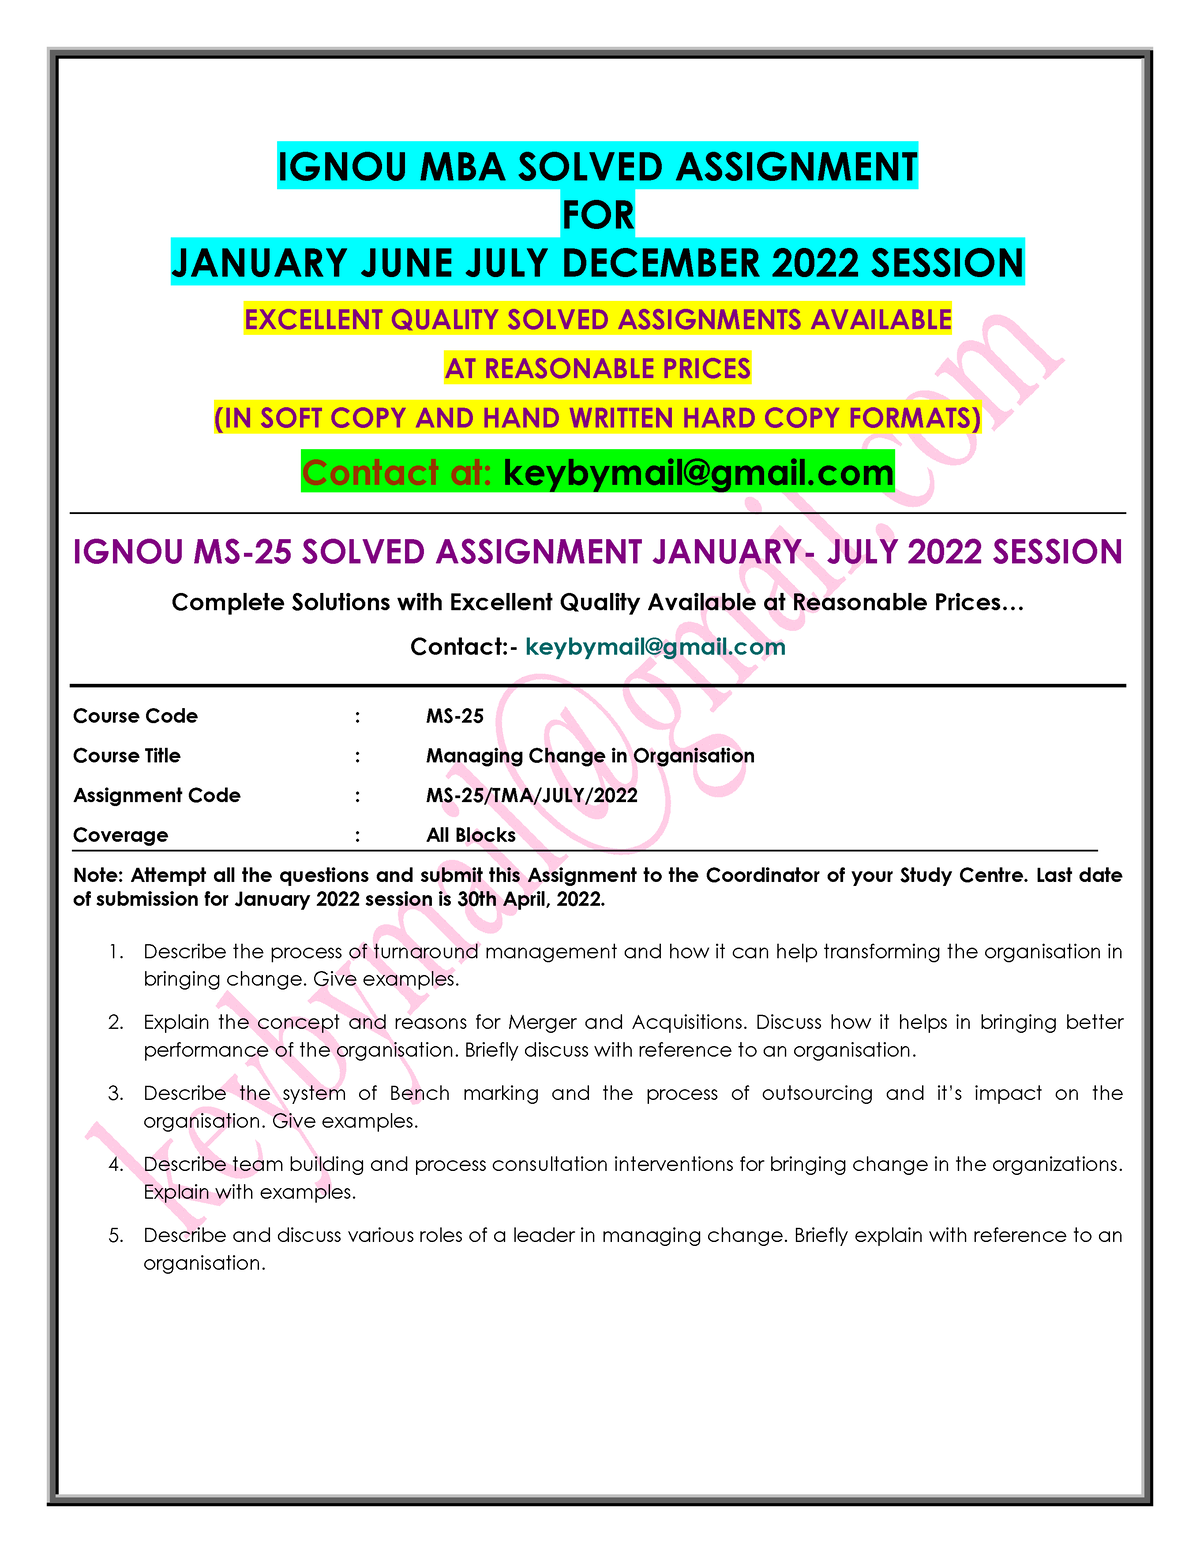 ignou mba assignment july 2022